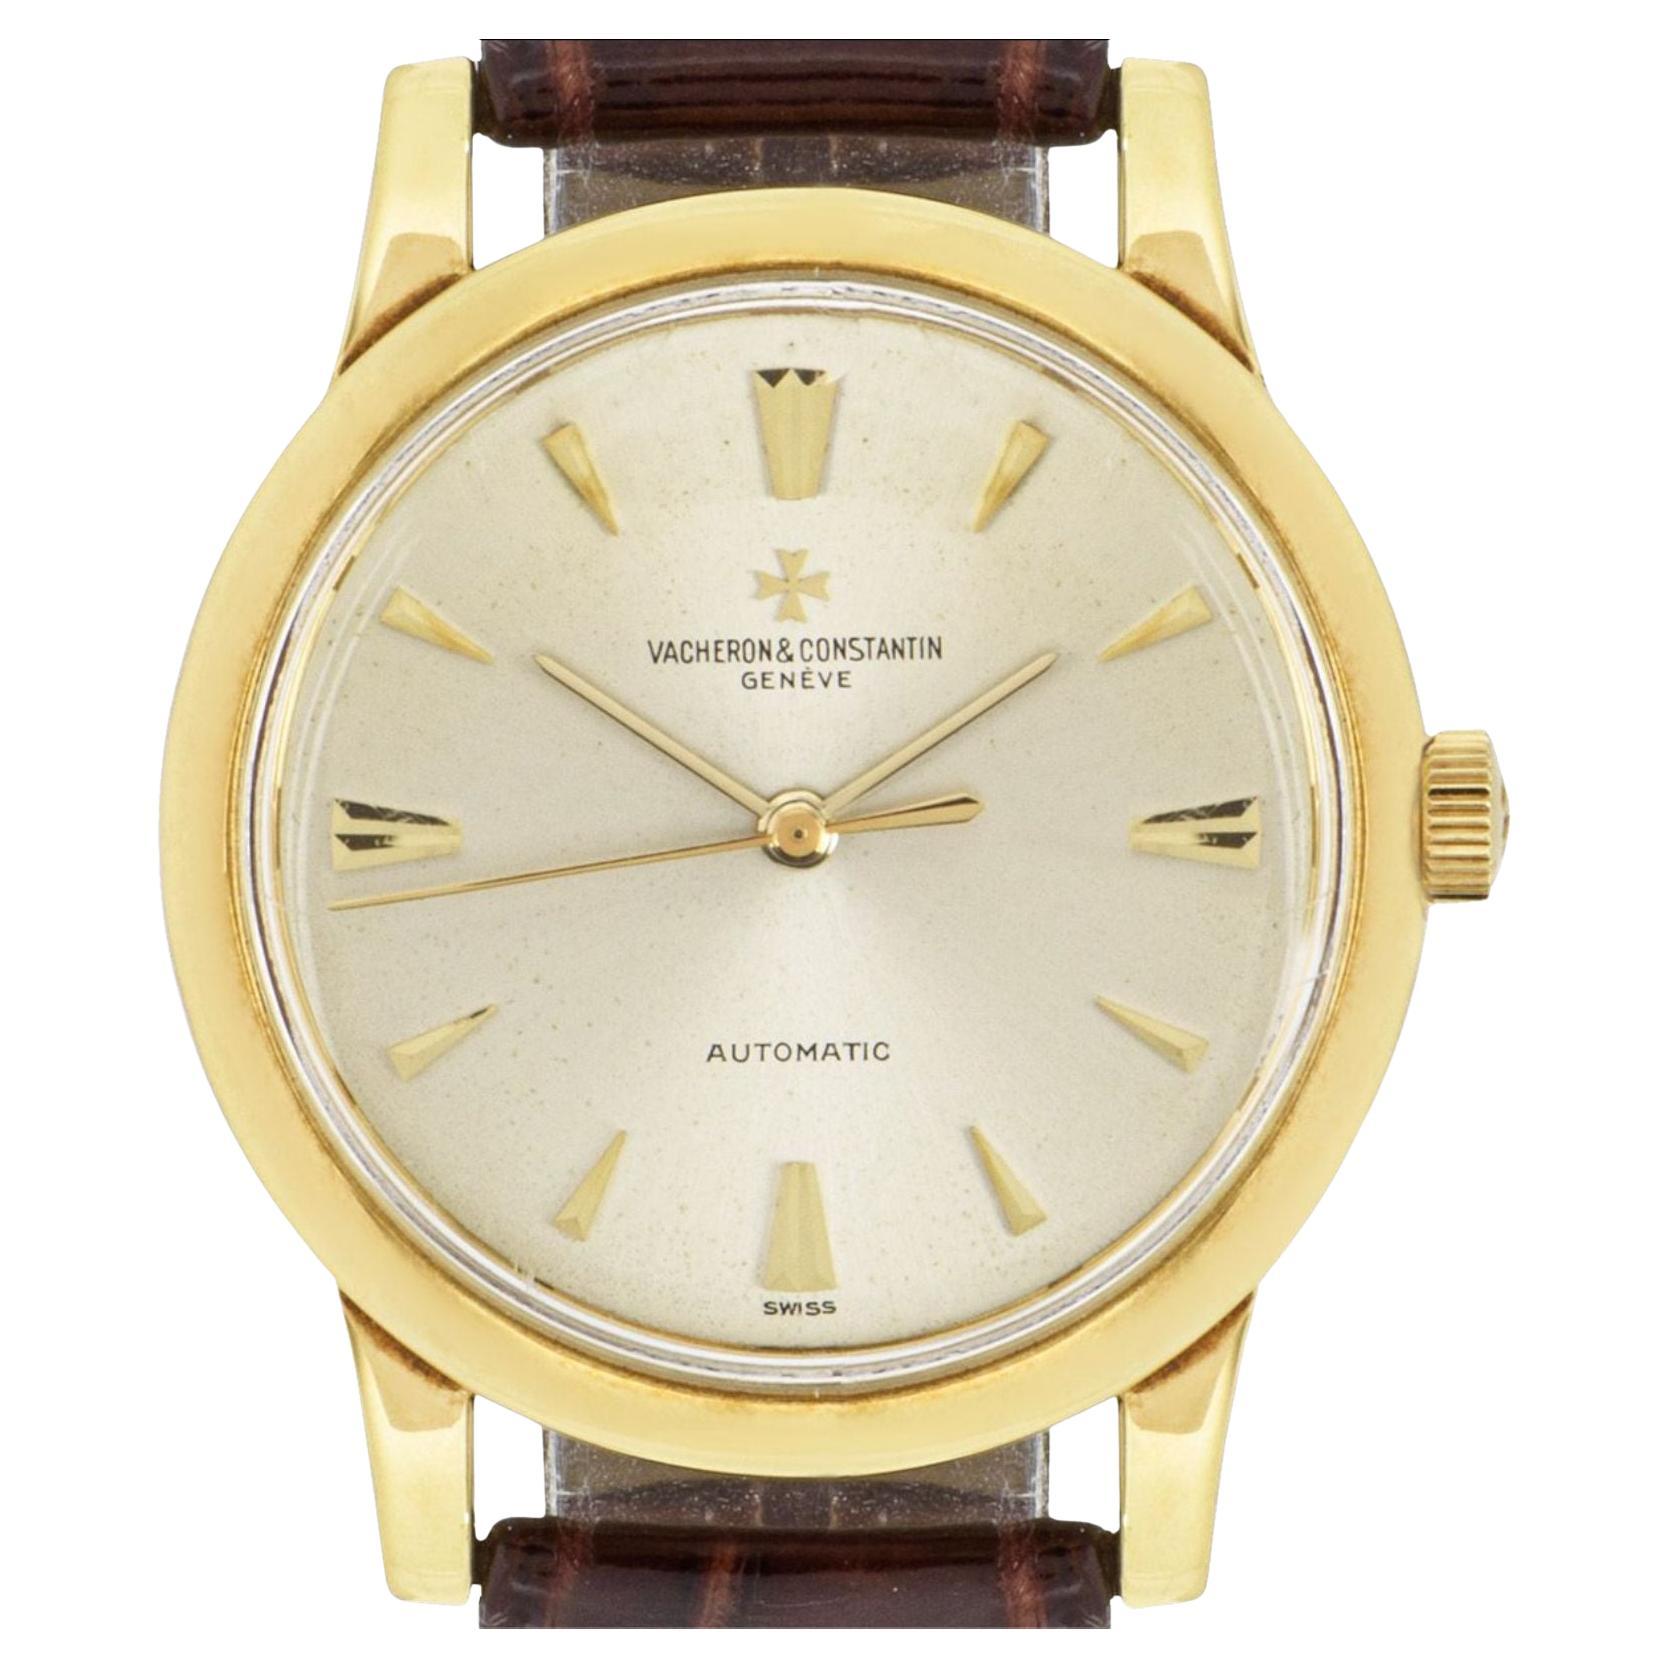 A vintage mens 35mm wristwatch in yellow gold by Vacheron Constantin. Featuring a silver dial with applied hour markers and a fixed yellow gold bezel. Fitted with a plastic glass, a self-winding automatic movement and a generic leather strap set